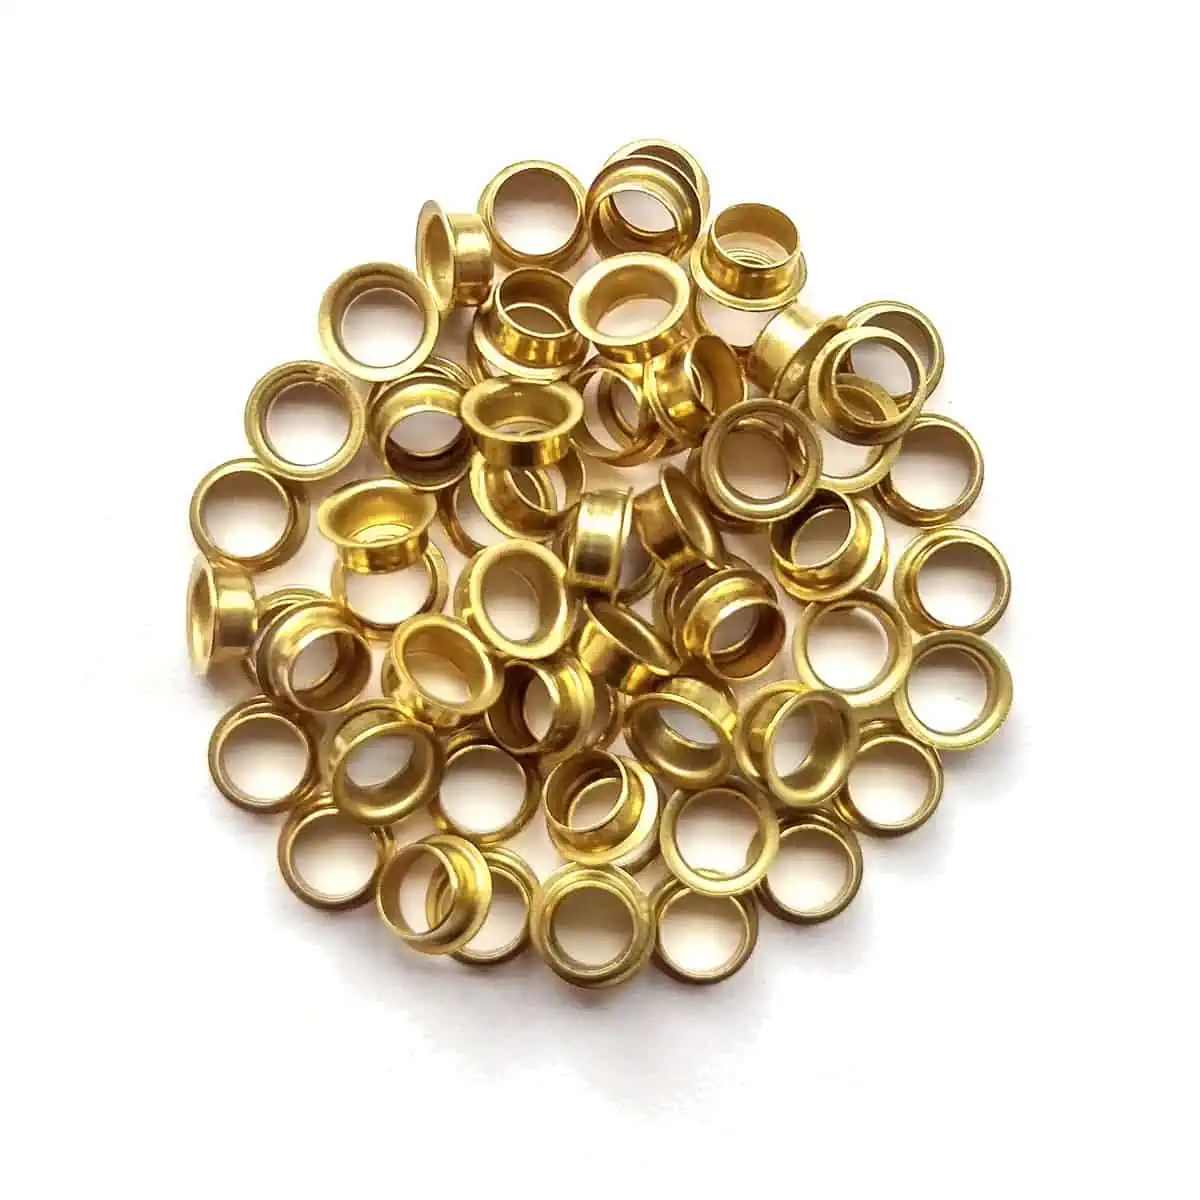 A pile of M&F Stringing's brass eyelets.